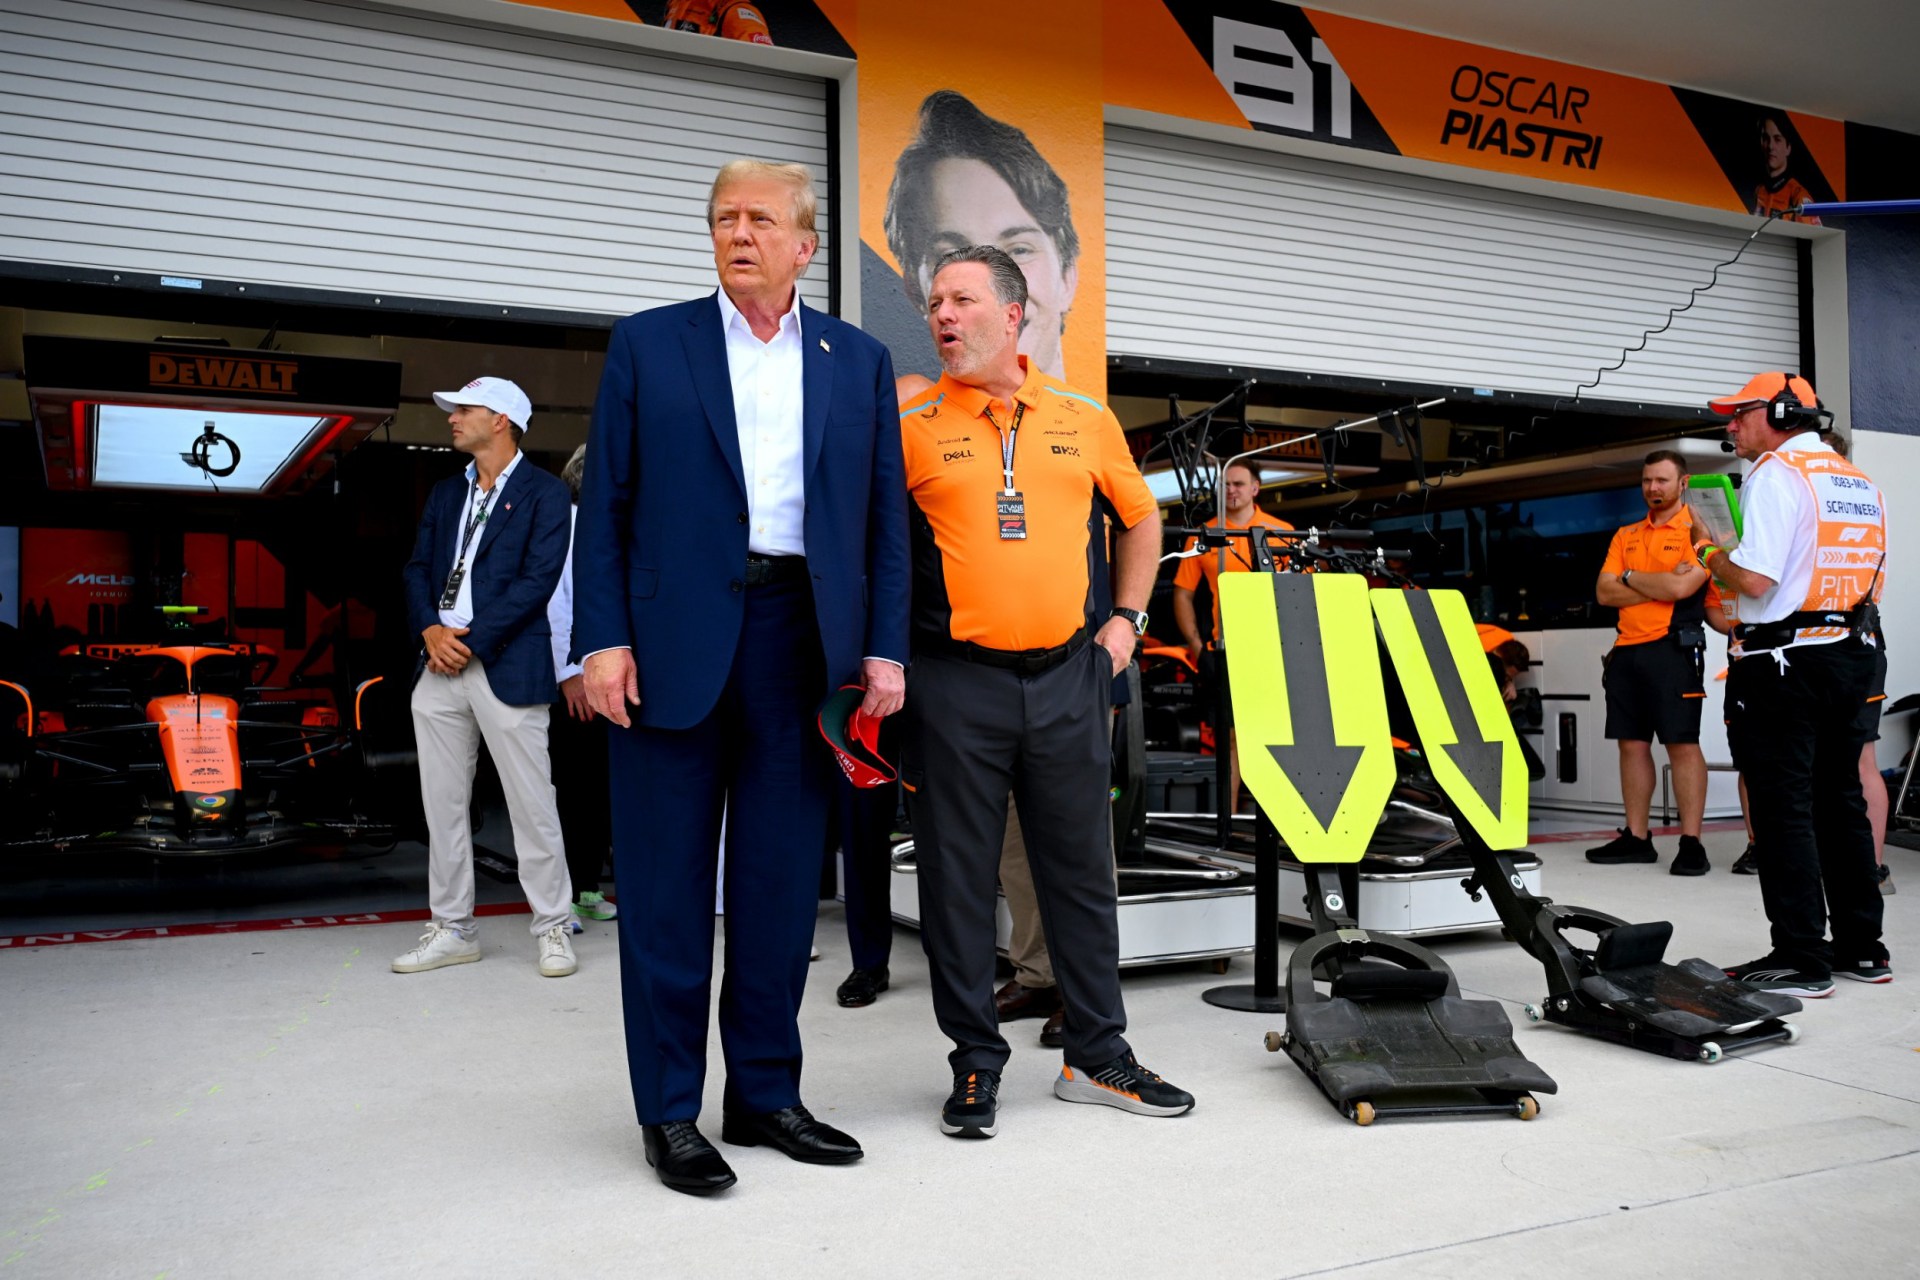 donald trump attends miami grand prix after his $250,000-a-ticket fundraiser was shut down